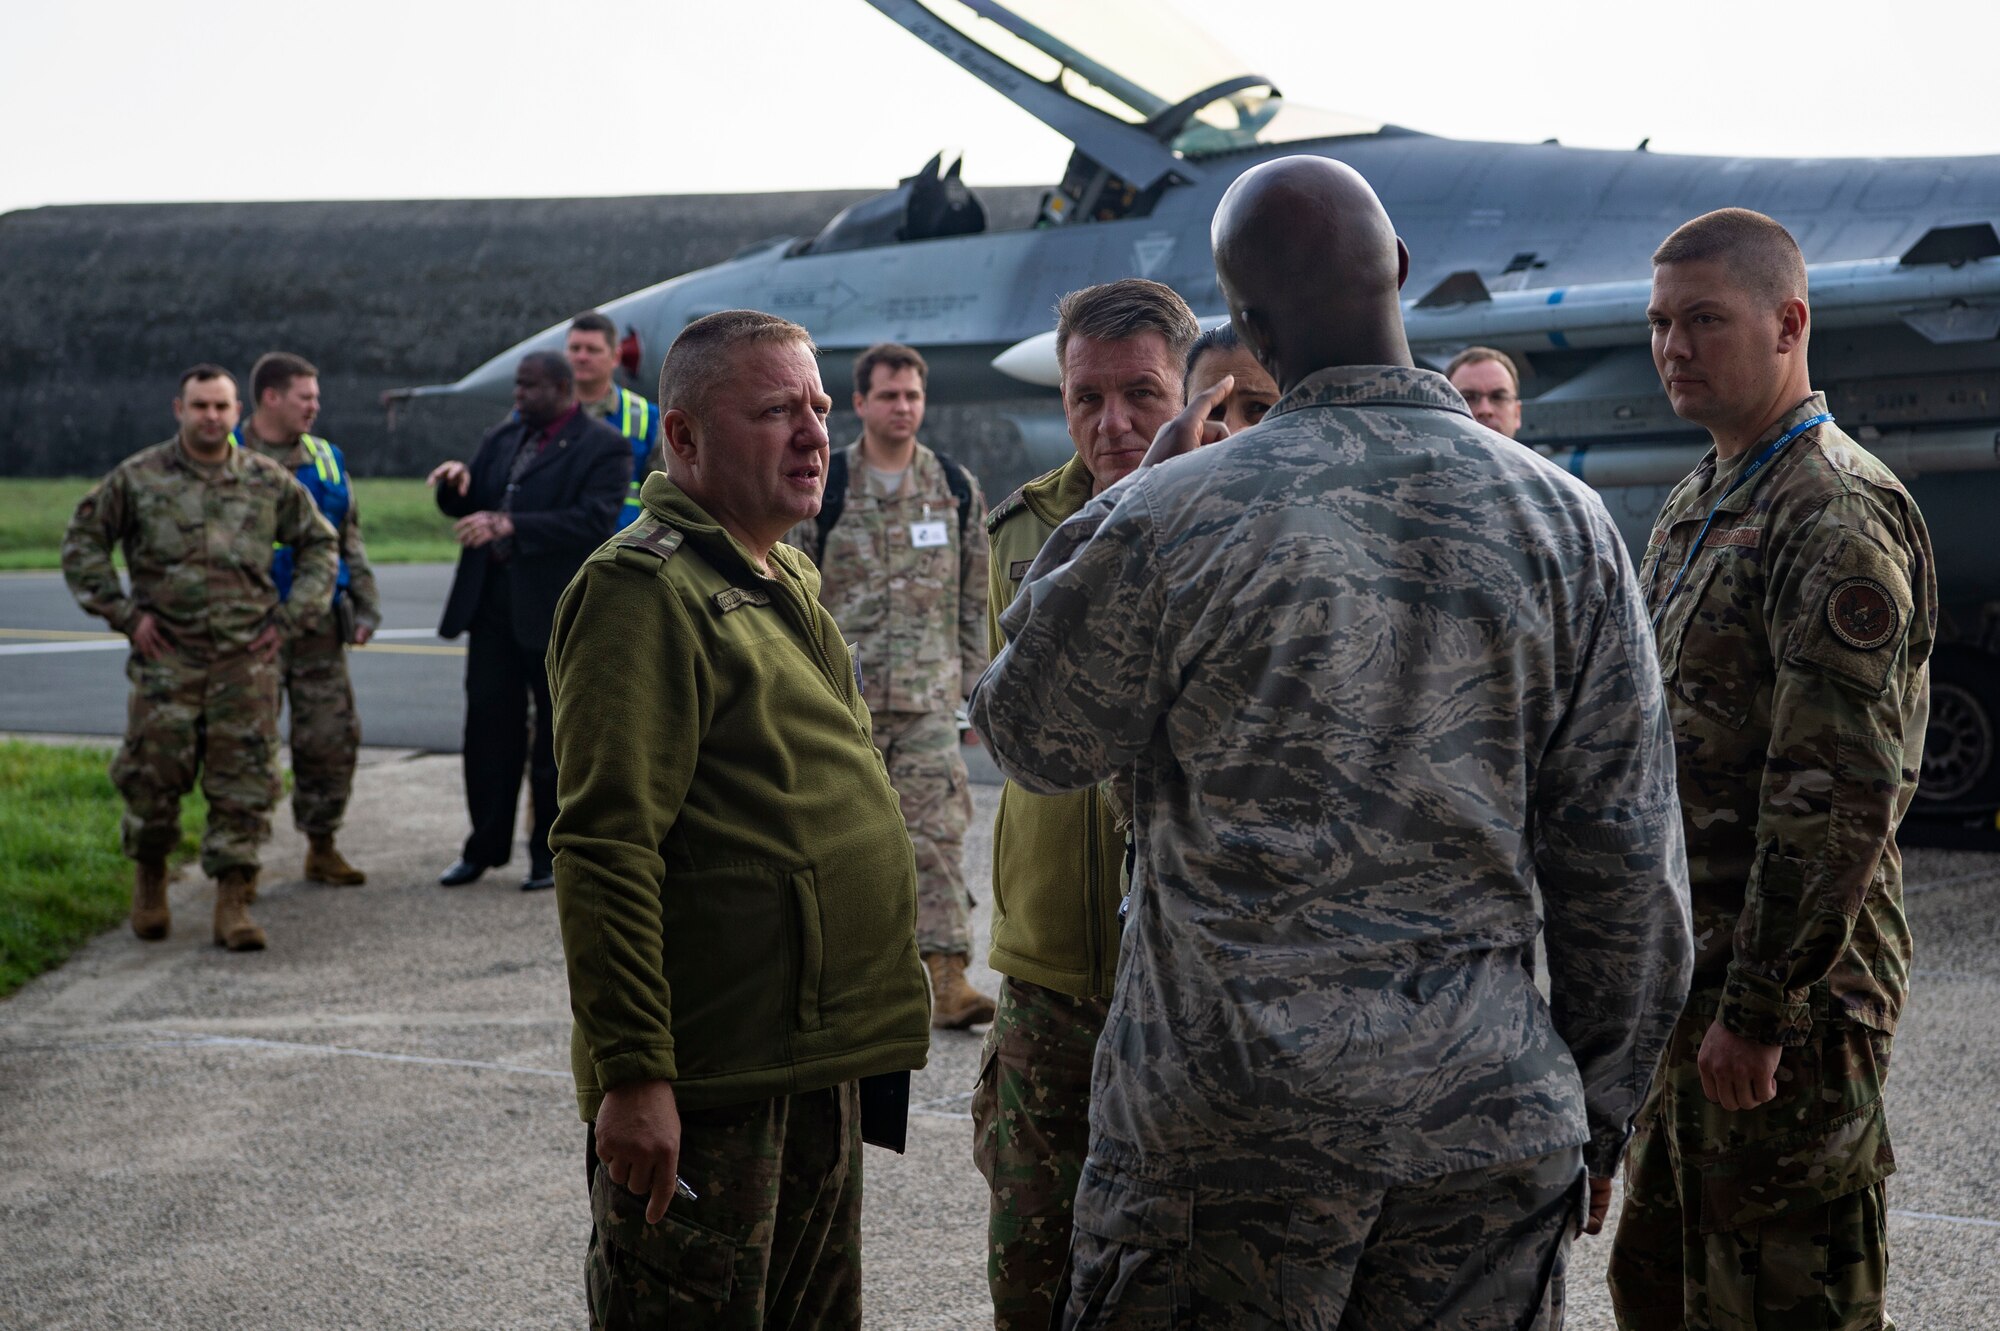 U.S. Air Force Airmen from the 52nd Fighter Wing escort Romanian inspection team members and members of the Defense Threat Reduction Agency during a Conventional Armed Forces in Europe Treaty exercise at Spangdahlem Air Base, Germany, Oct. 24, 2019. In the event of a real-world CFE inspection, the 52nd FW must account for all treaty-limited equipment, including combat aircraft in transit or equipment on cargo aircraft. (U.S. Air Force photo by Airman 1st Class Valerie Seelye)